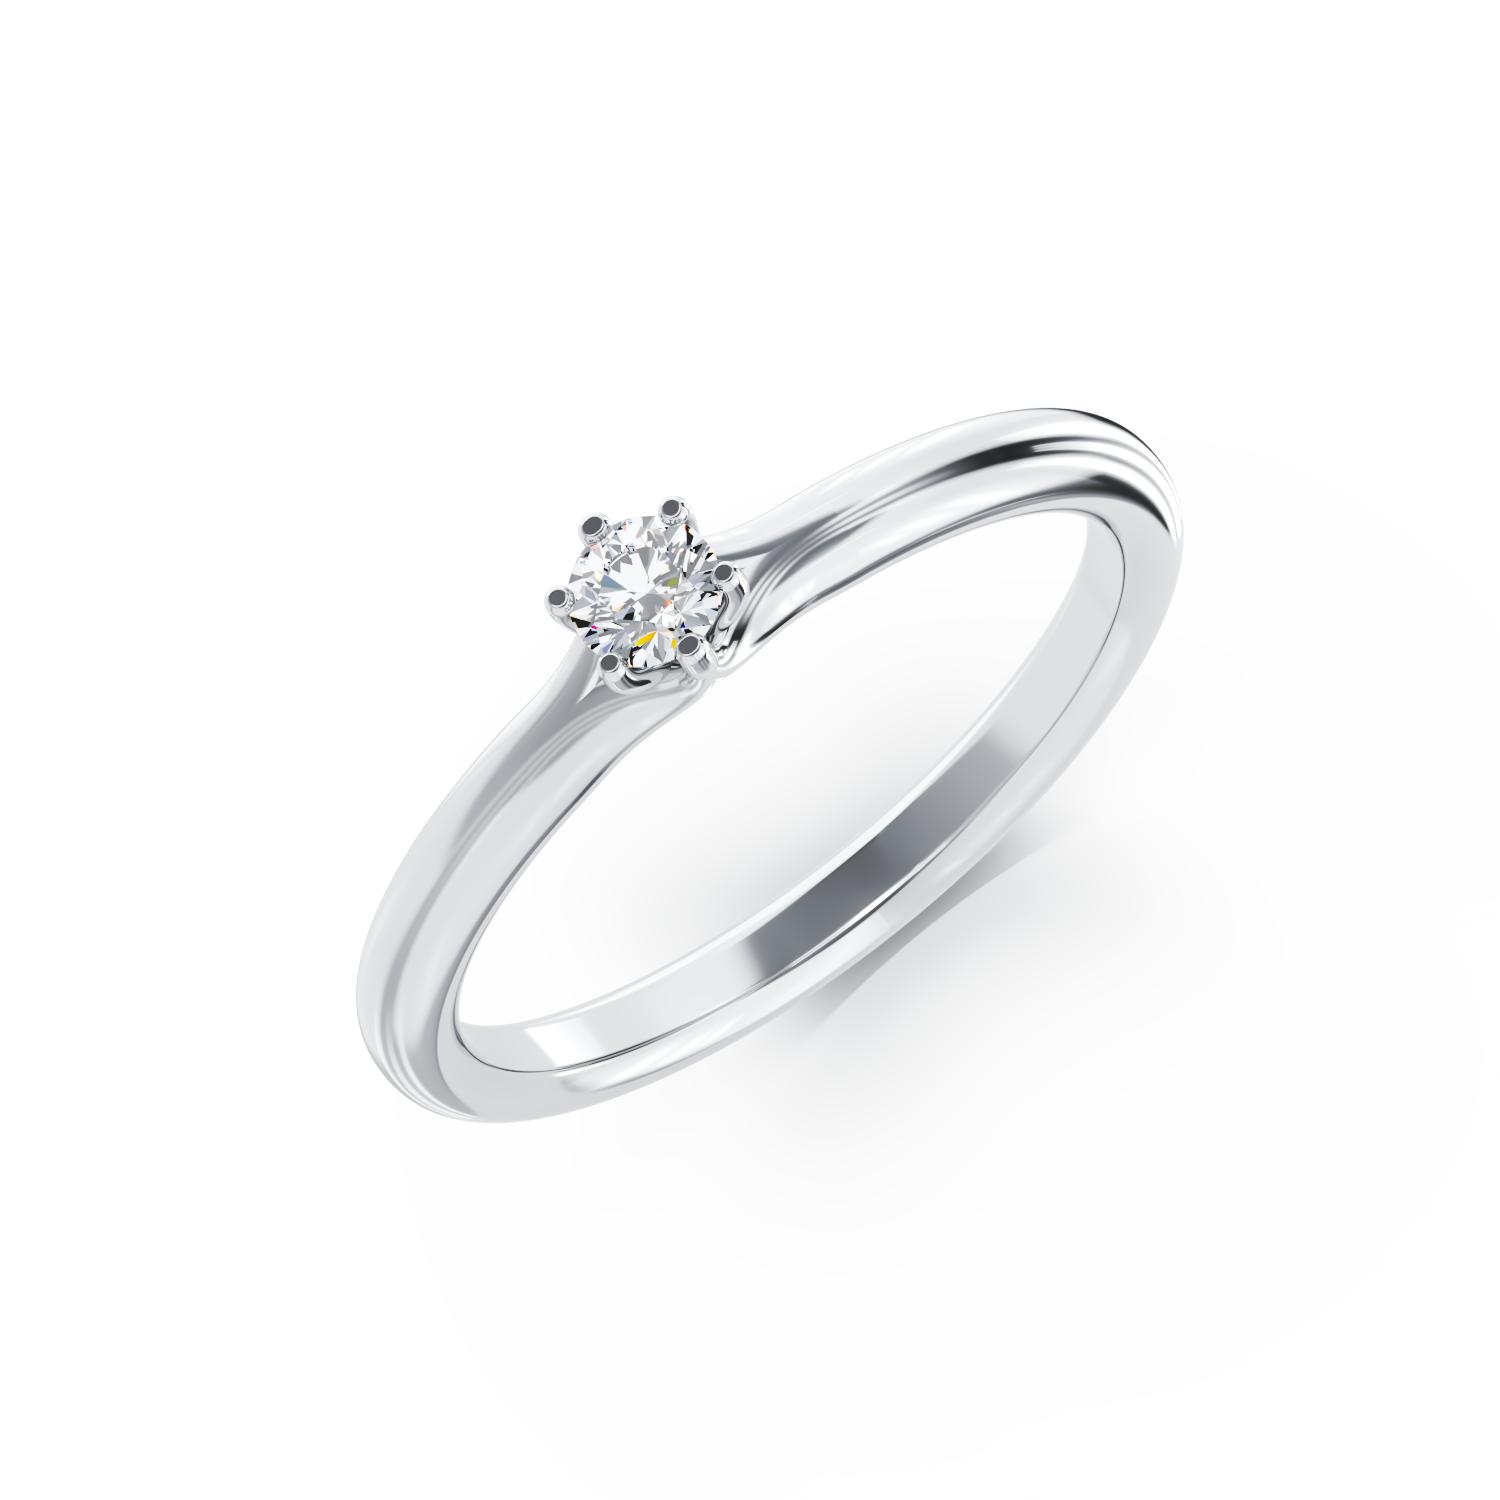 18K white gold engagement ring with a 0.101ct solitaire diamond